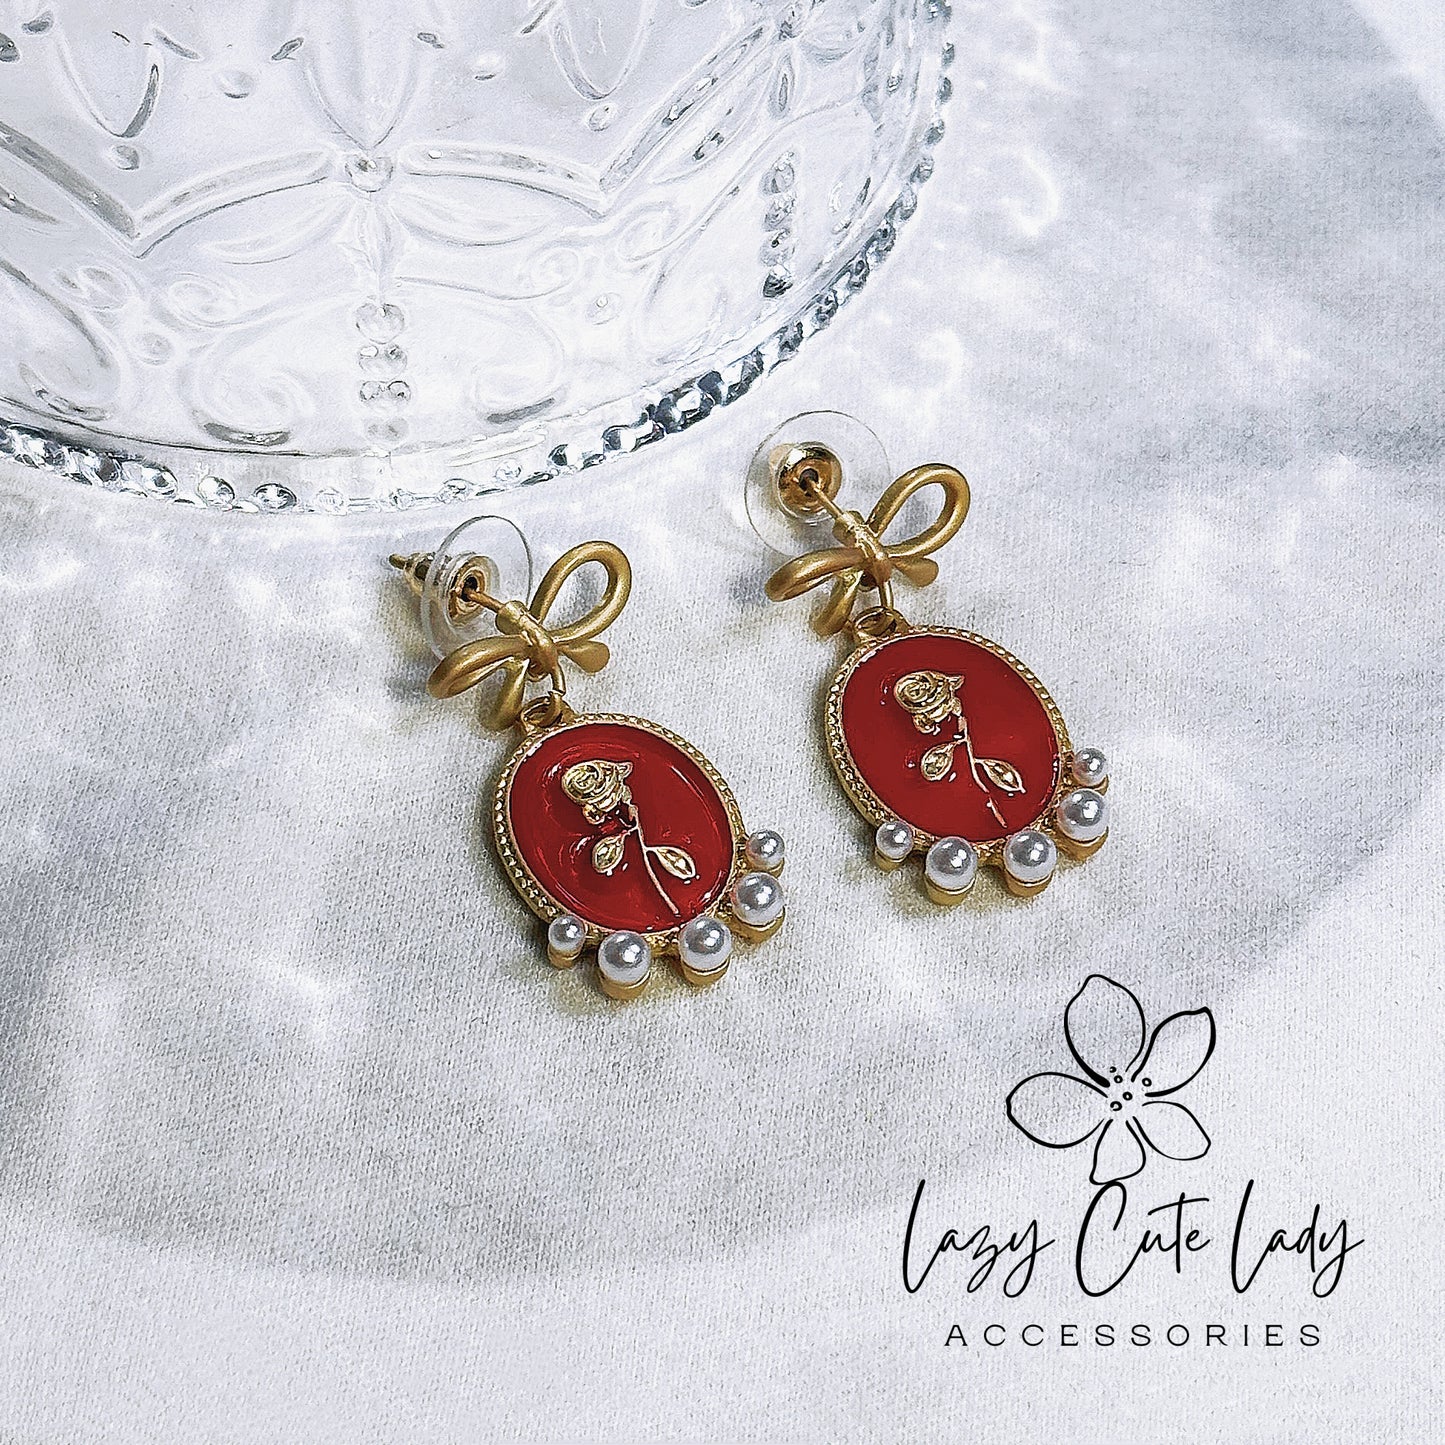 Lazy Cute Lady Accessories-Vintage Gold Bow and Oil Painting Red Rose Earrings-Metal allergy-friendly earring-Fashion Earring-Gift-for girl for women